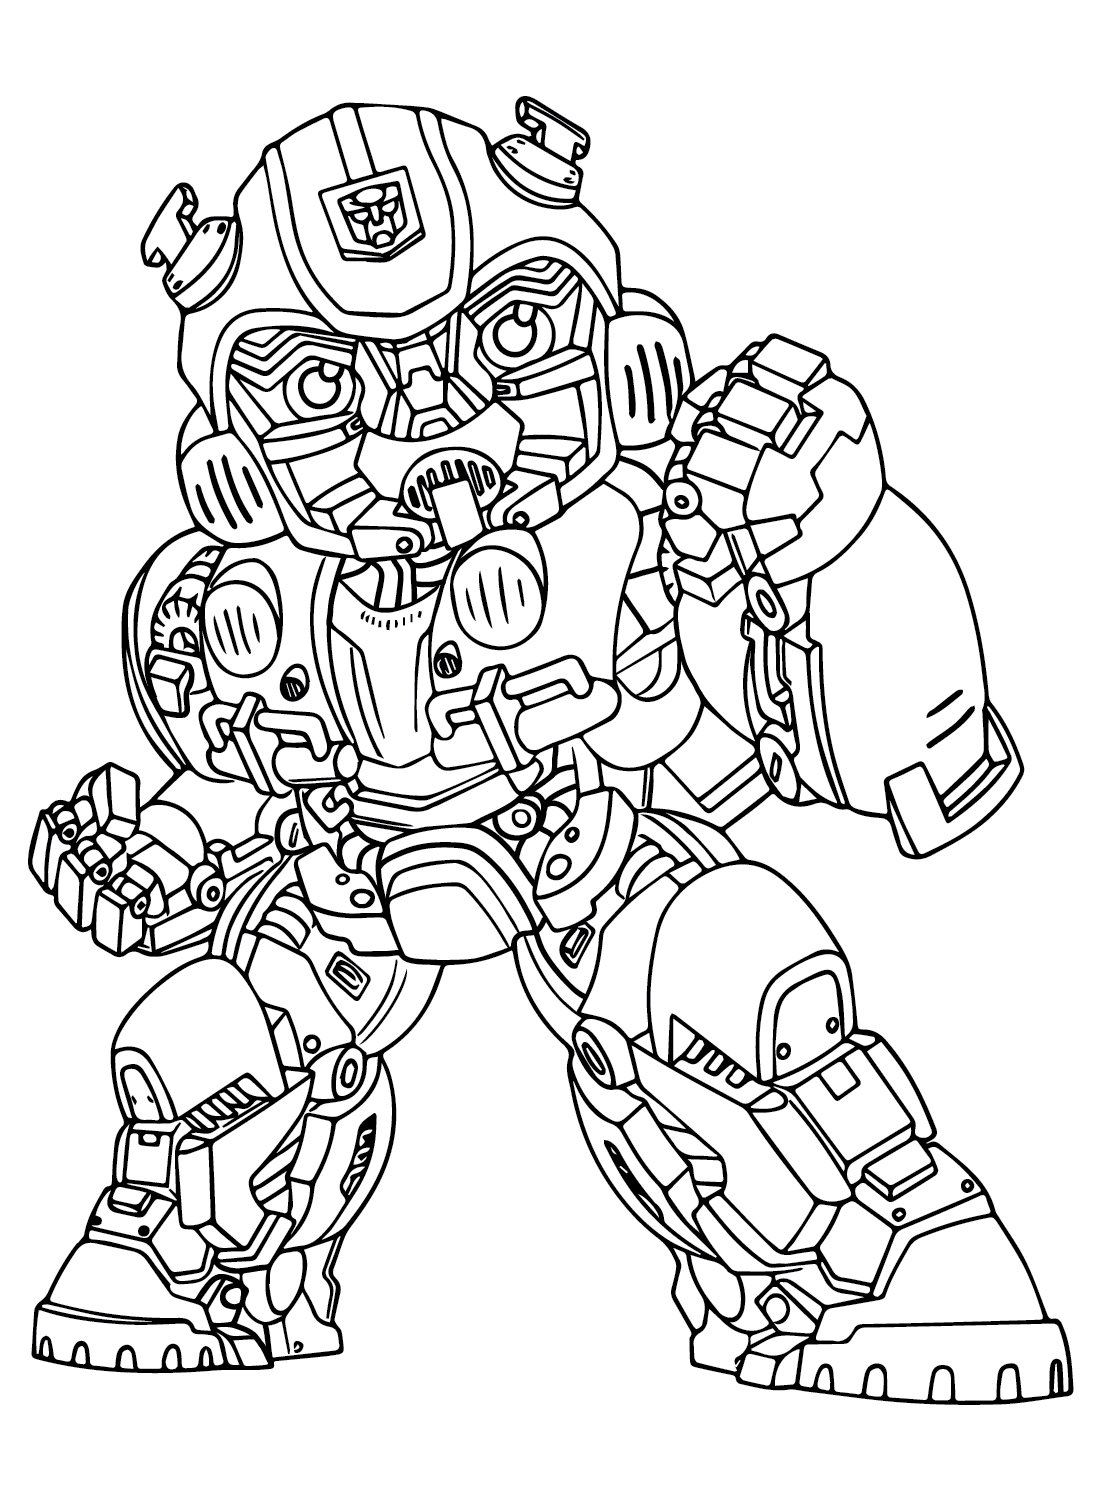 Printable Bumblebee Coloring Sheet Free Printable Coloring Pages